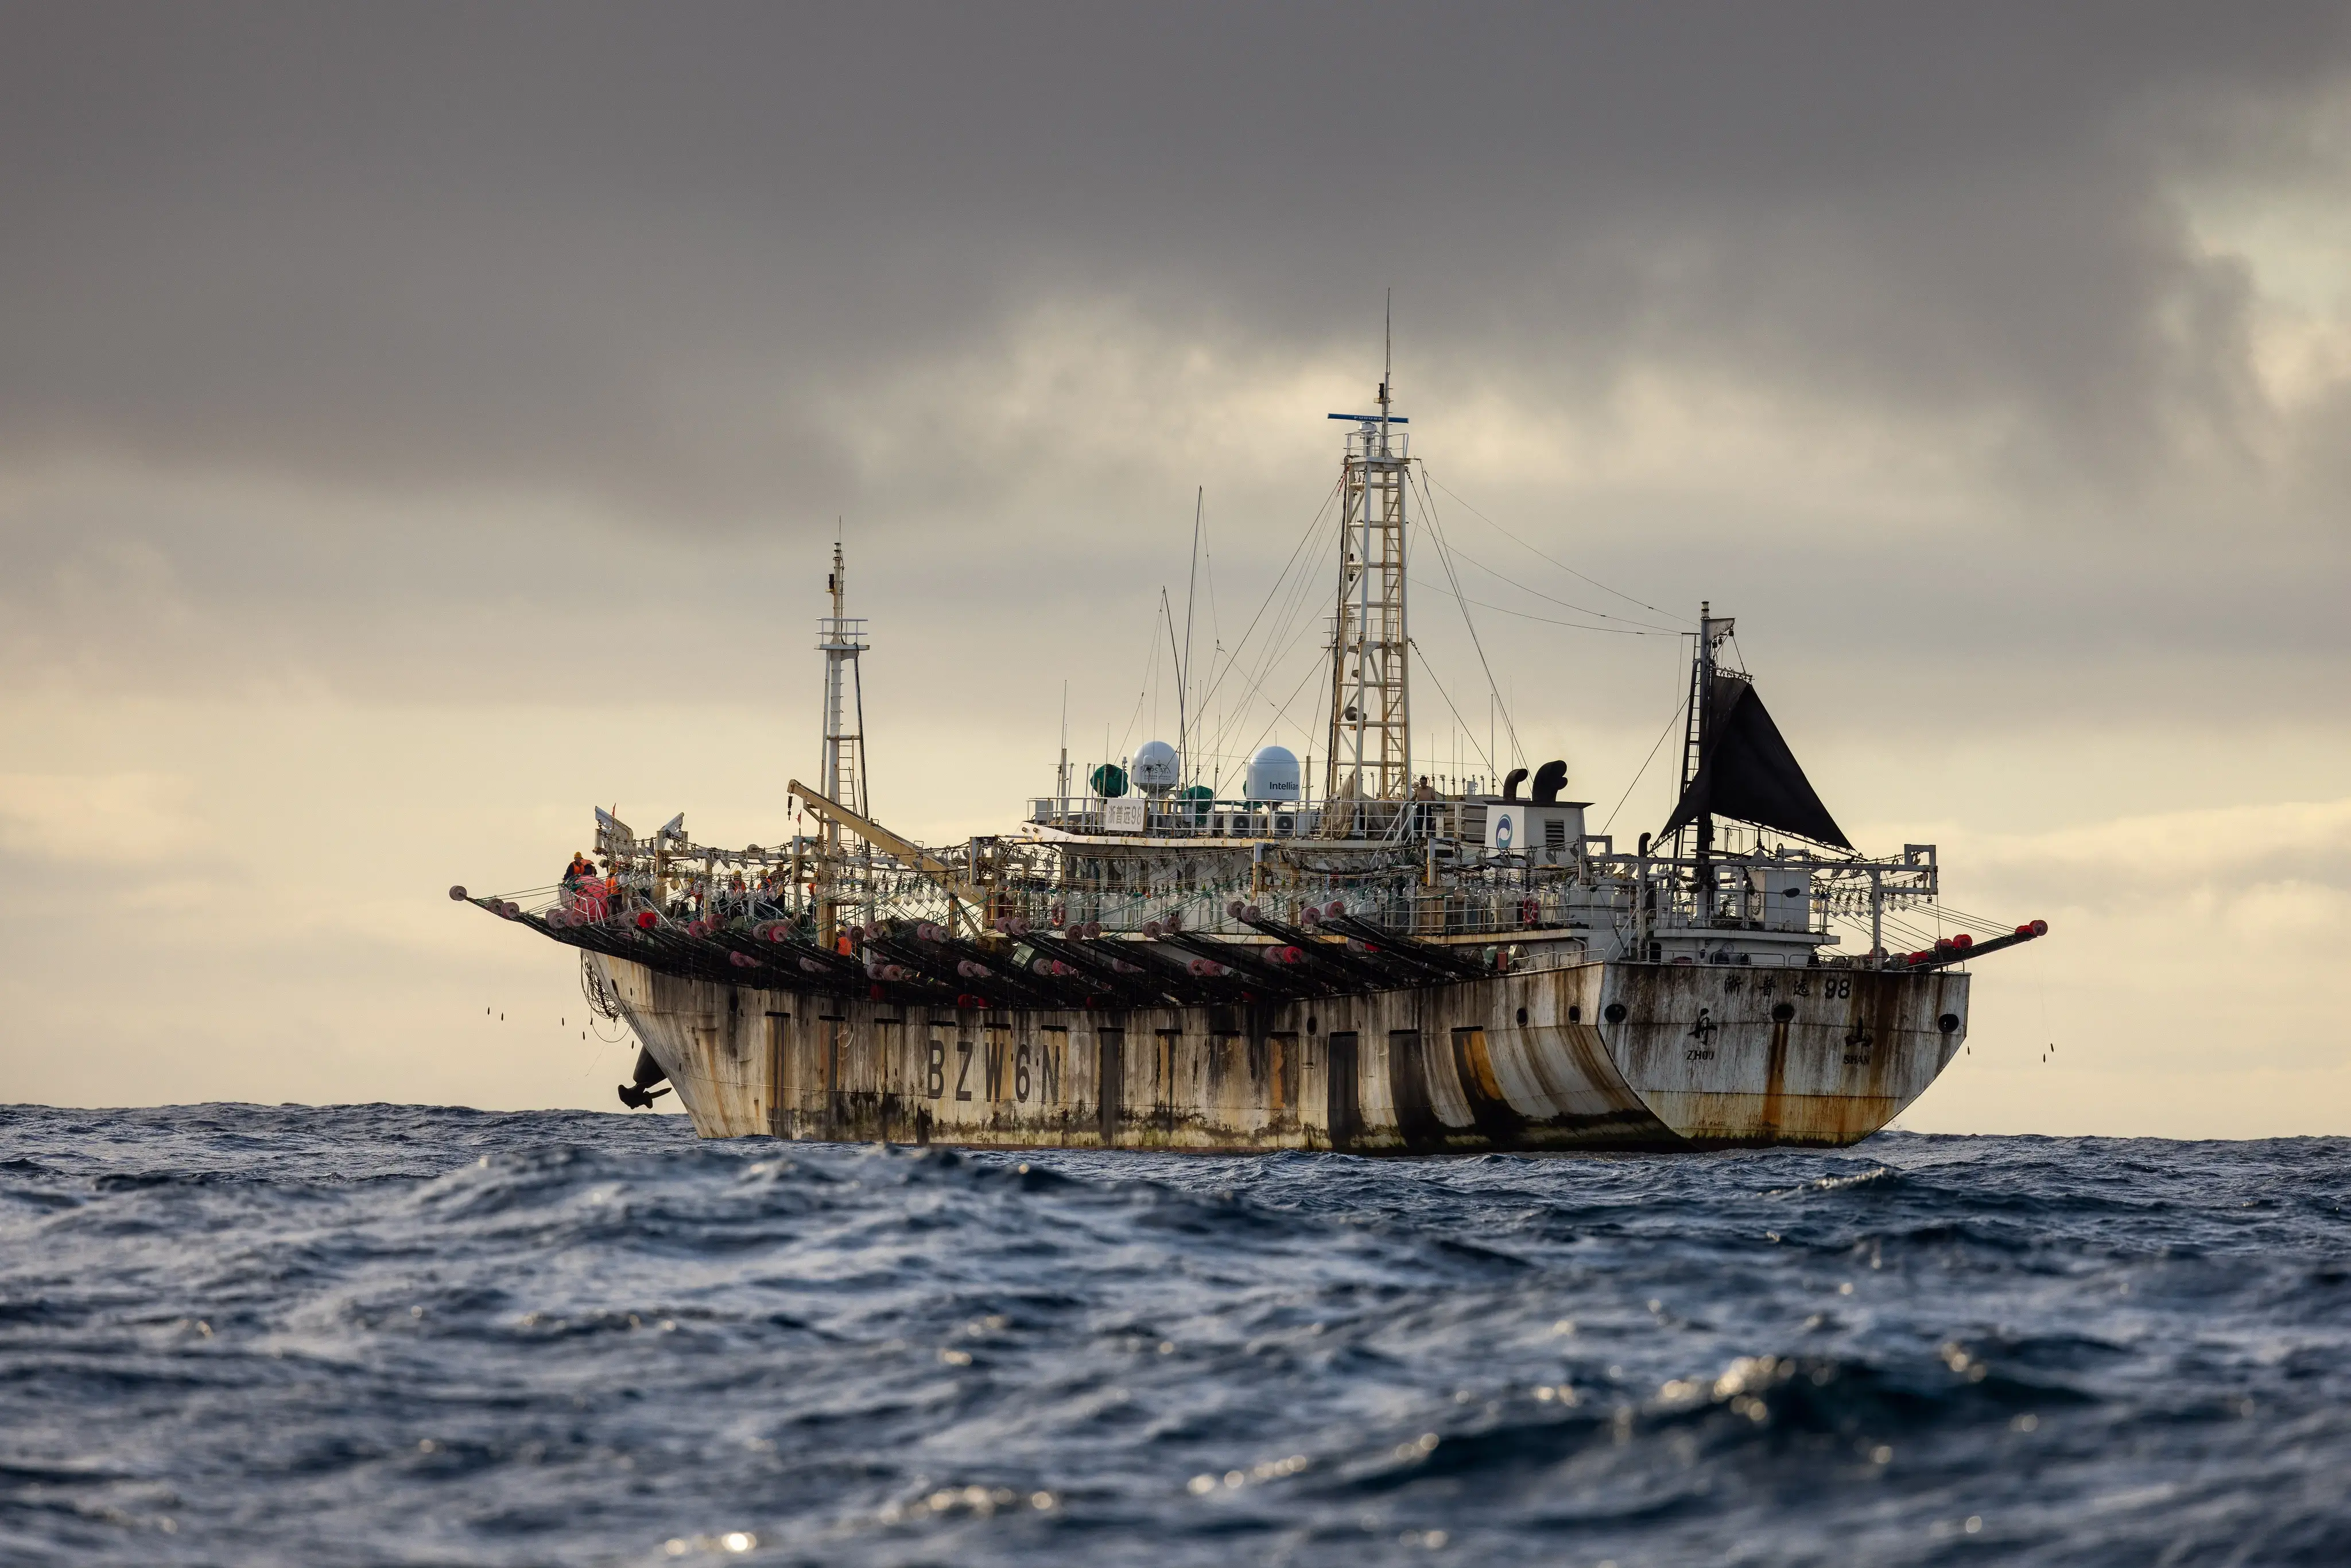 A fishing vessel floats on the open sea in cloudy weather